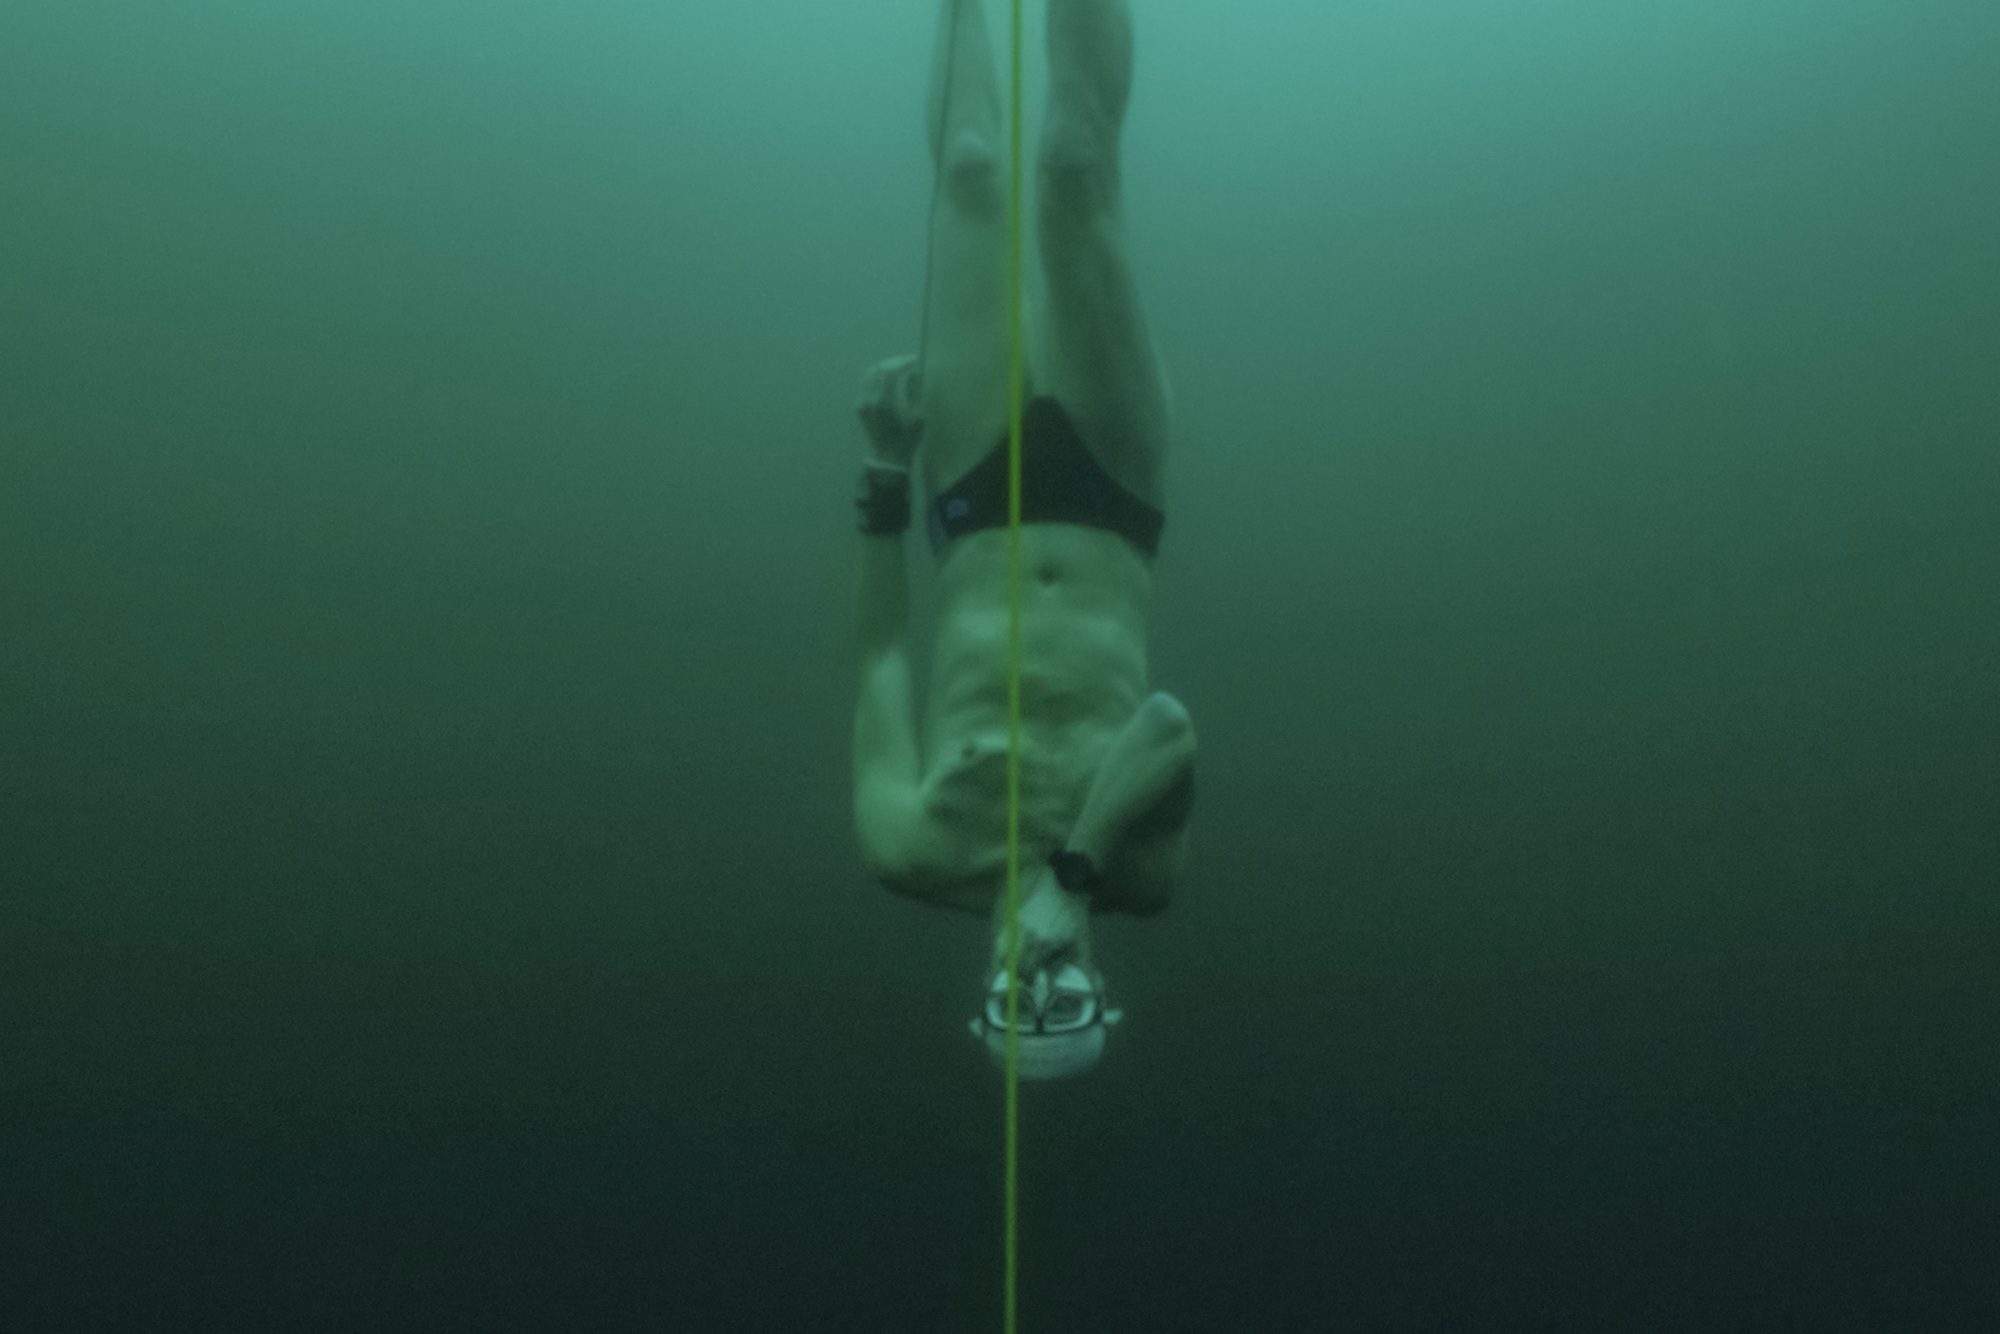 Czech freediver David Vencl dives to 52 metres under the ice of Lake Sils in one breath and wearing only a swimsuit in this picture taken from a video in Sils near St. Moritz, Switzerland March 14, 2023. David Vencl Organisation/Handout via REUTERS